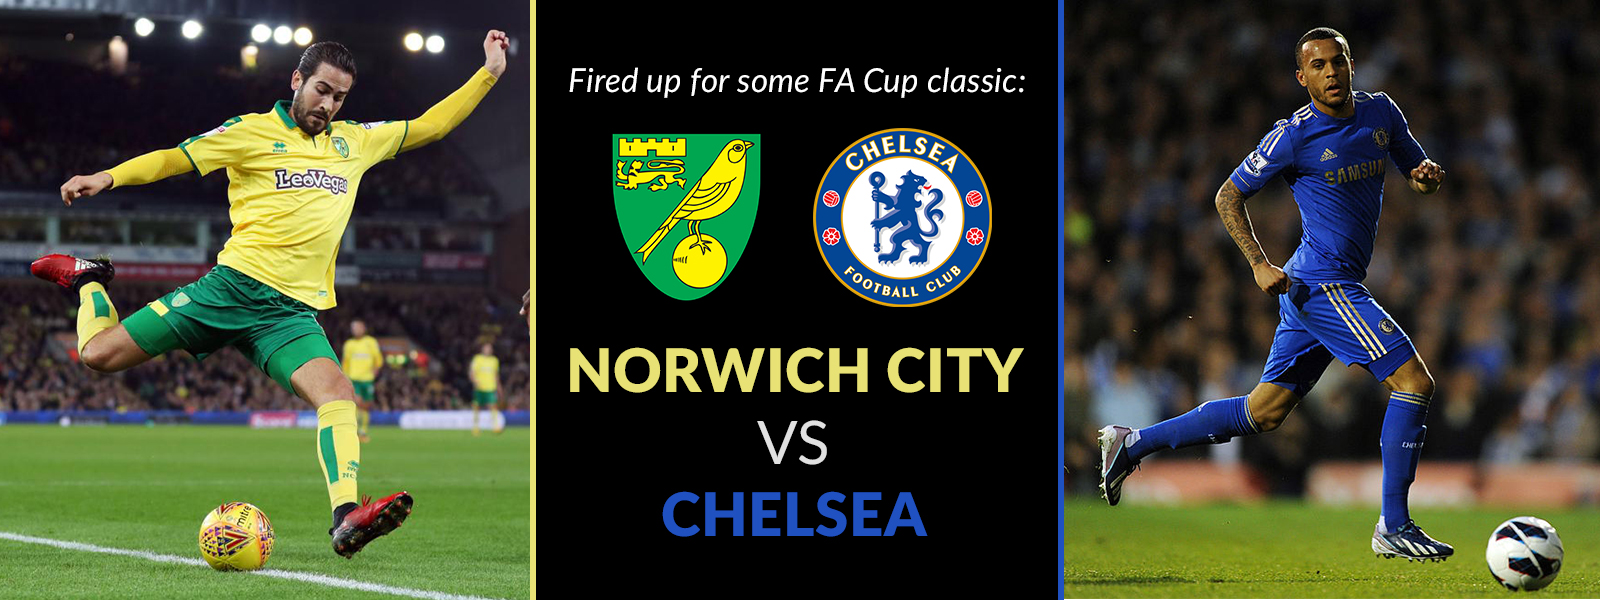 Norwich City vs Chelsea Pre-match analysis & betting predictions